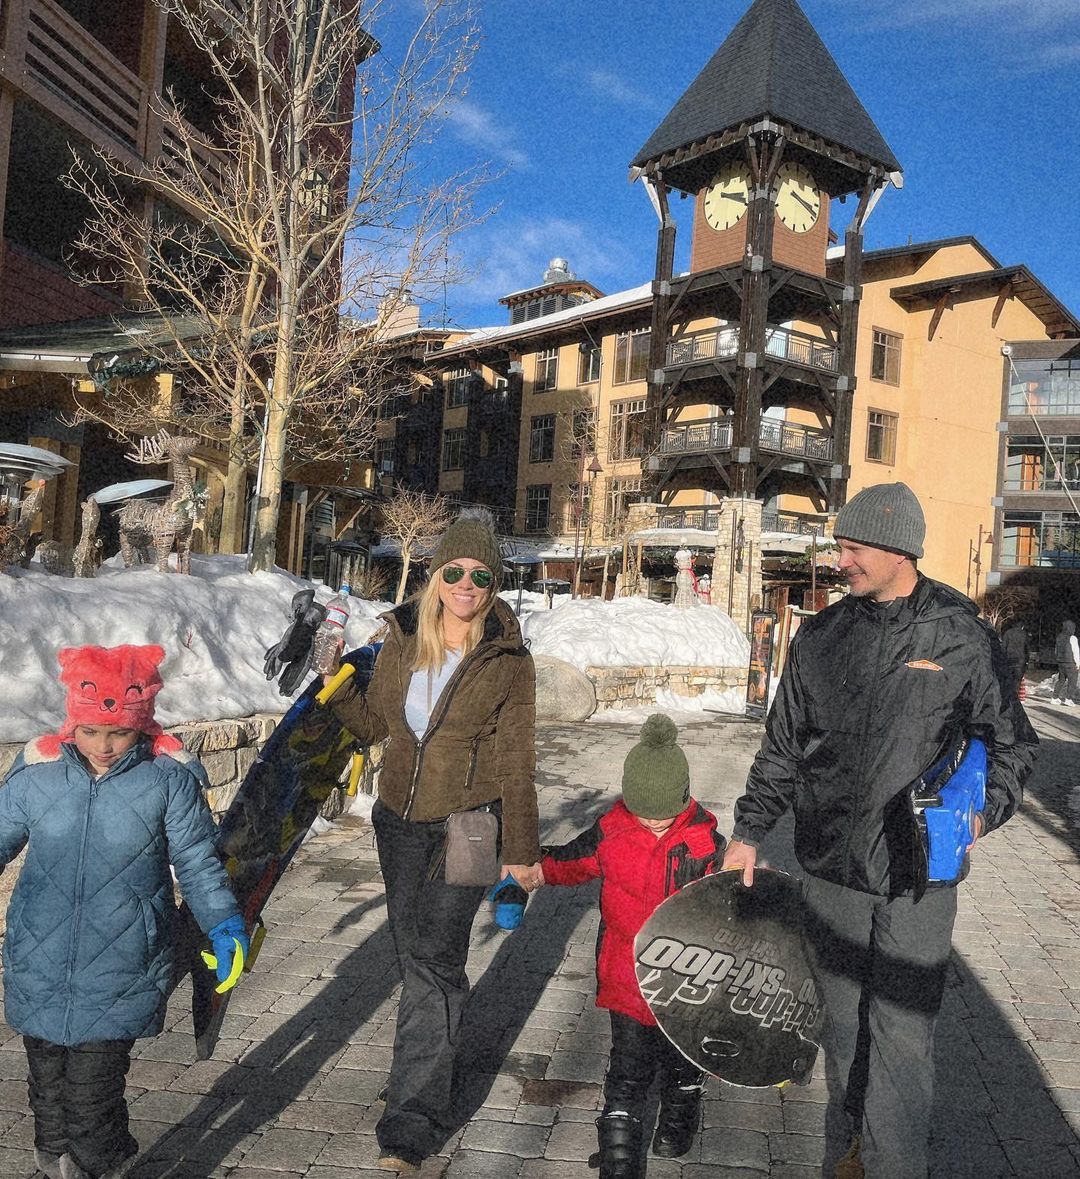 Jessica Hall and family getting ready to hit the ski slopes.